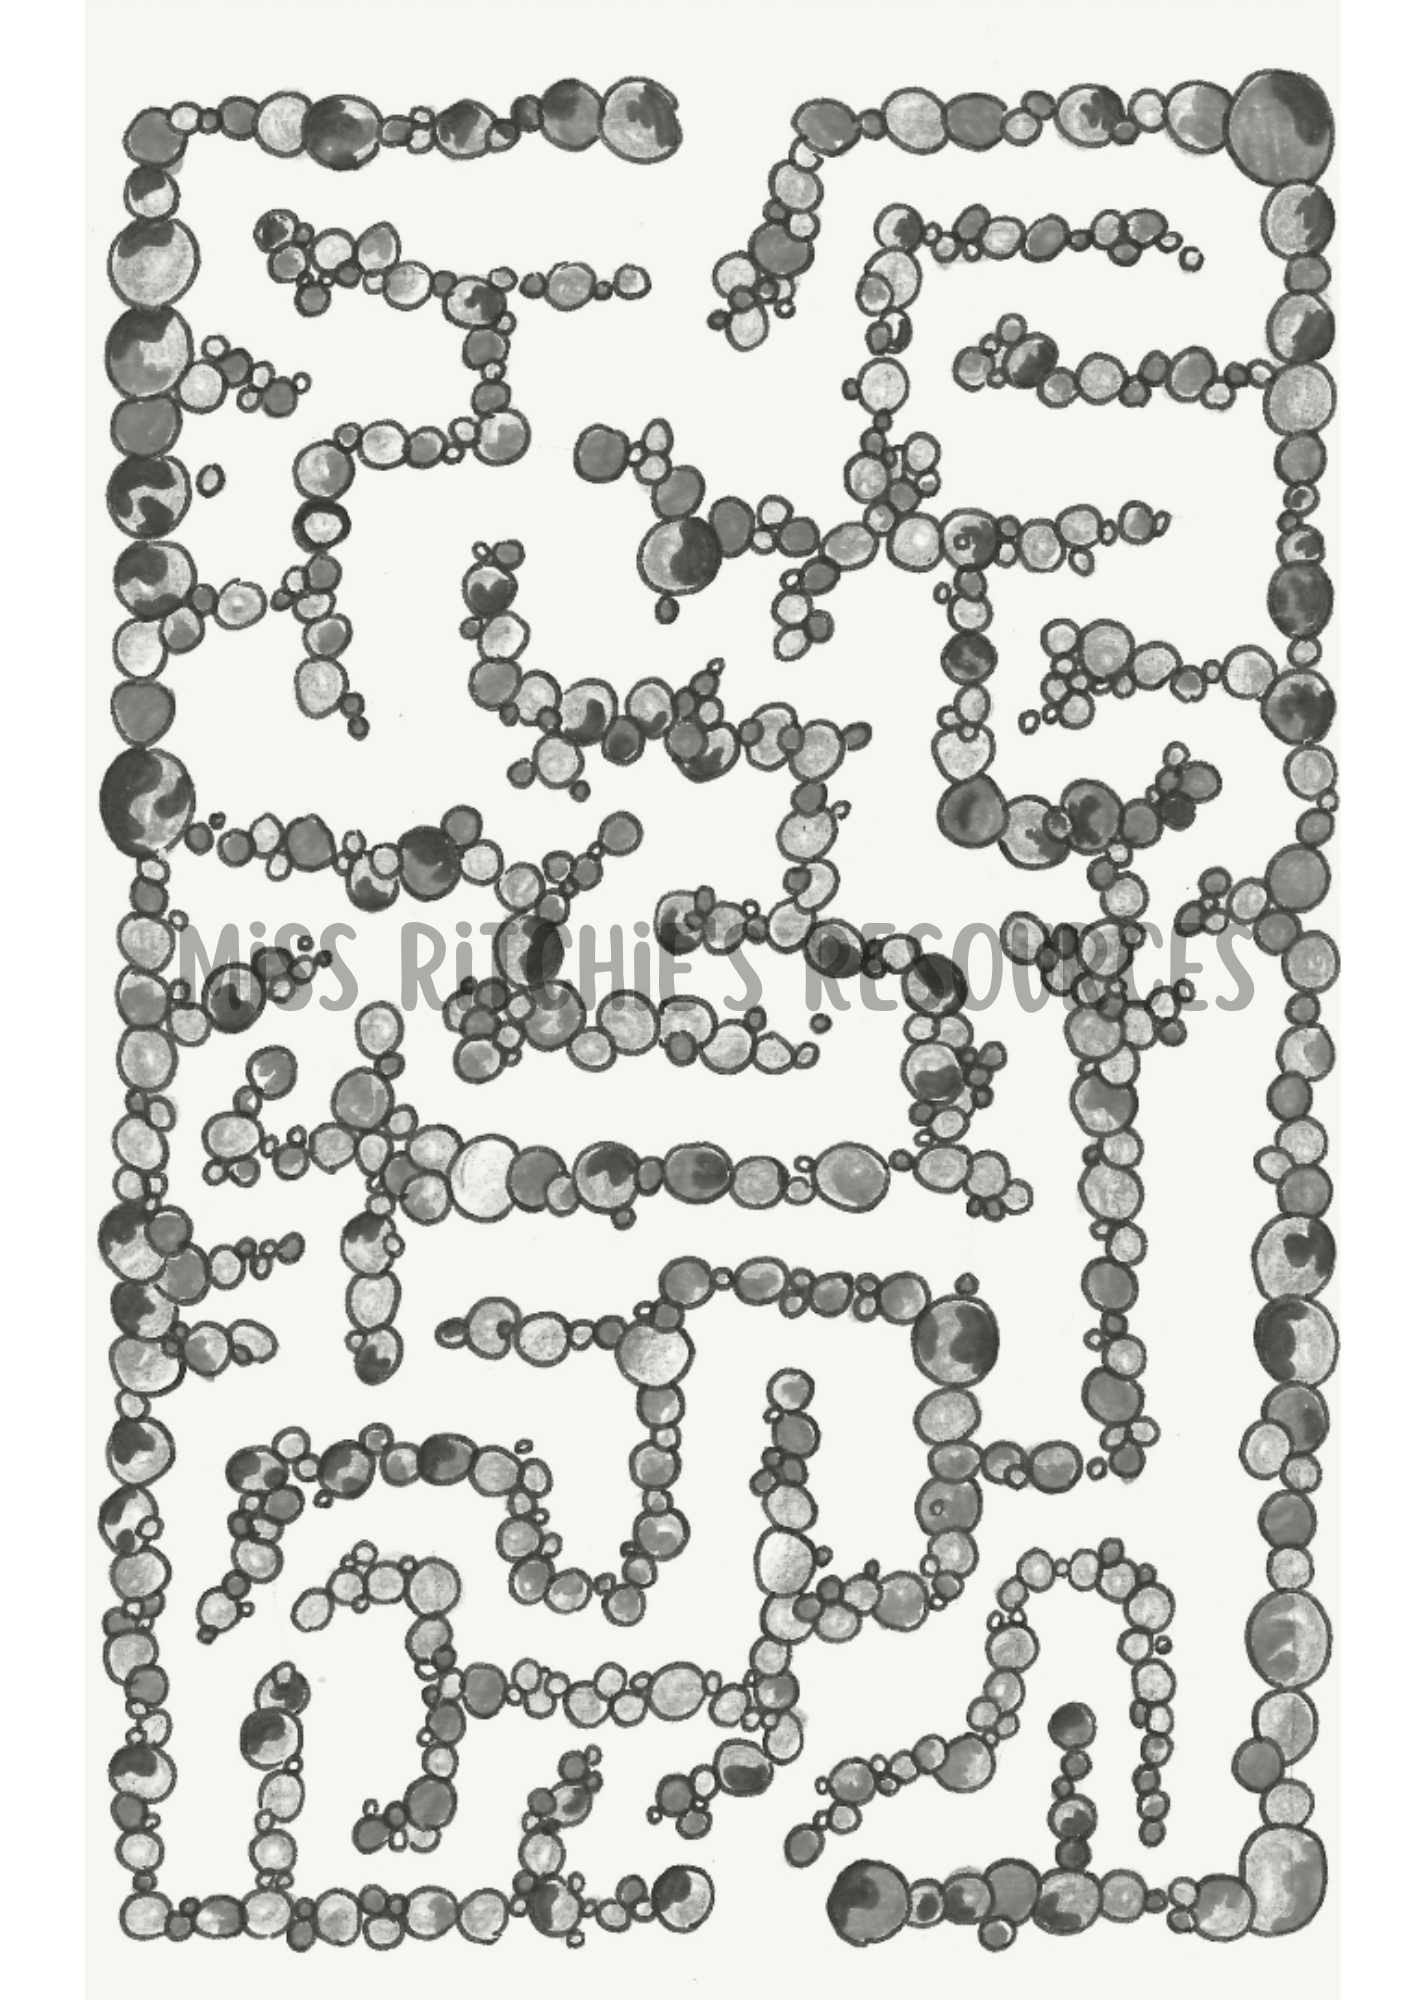 Bubble maze. Educational resource. Supports the development of fine motor skills, decision making, and a growth mindset. 